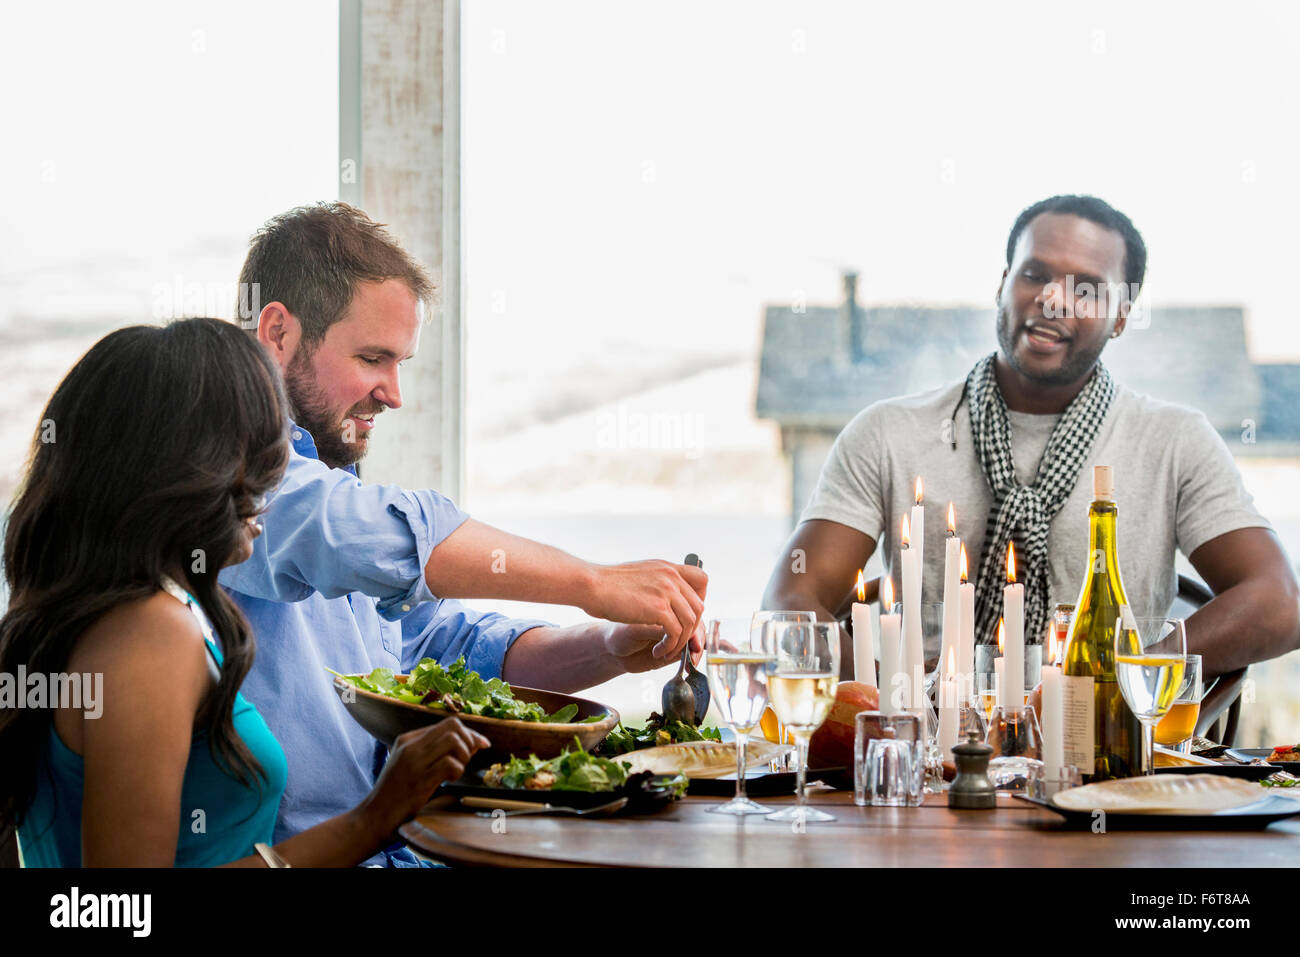 Friends eating at dinner party Stock Photo